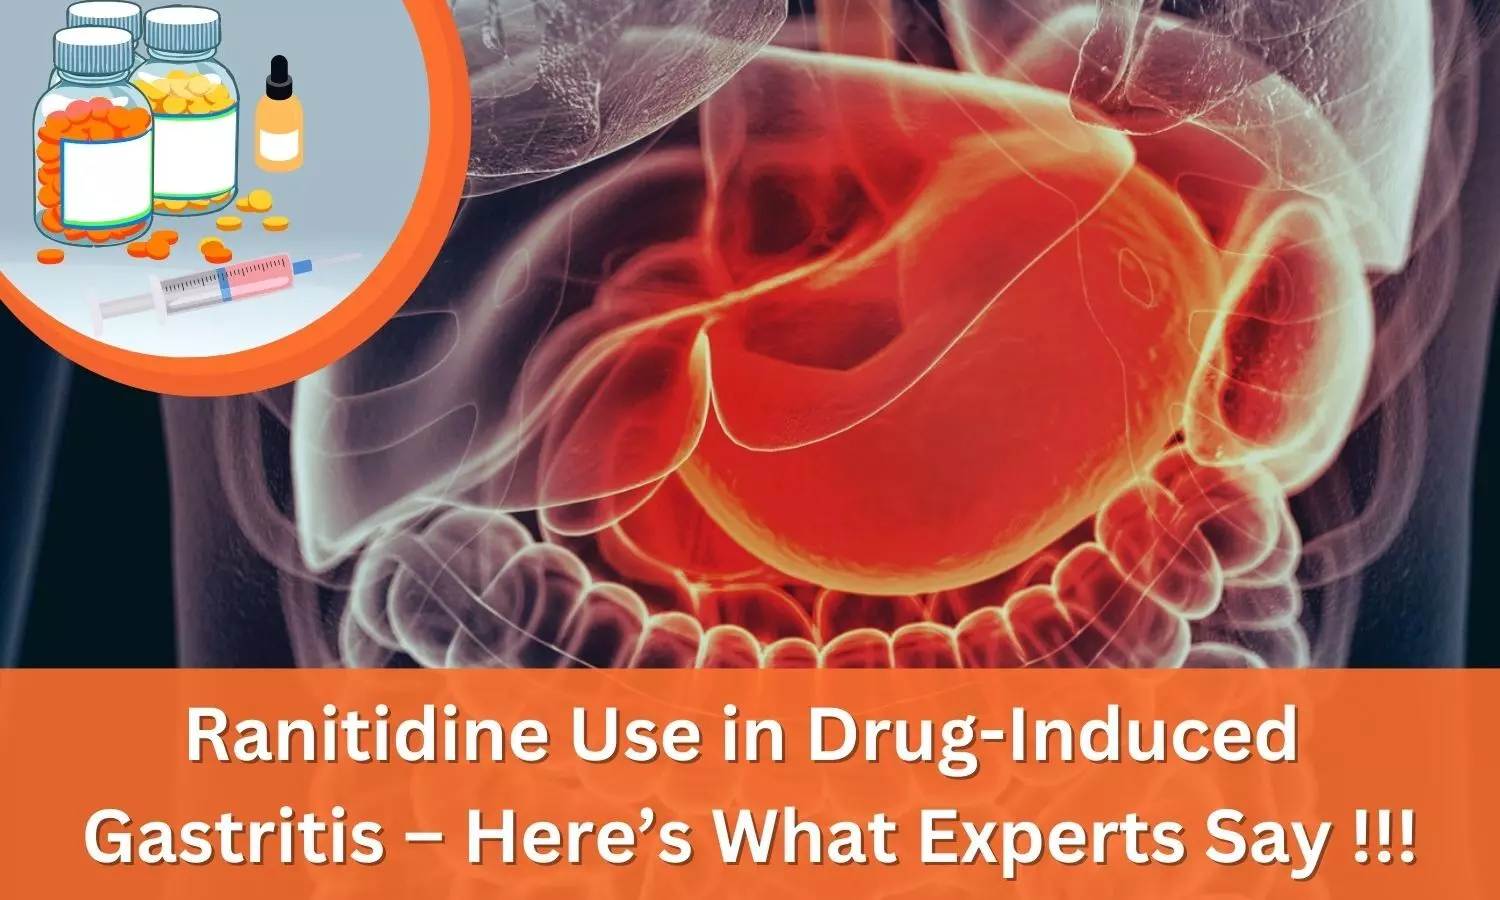 Ranitidine Use in Drug-Induced Gastritis-Heres What Experts Say !!!